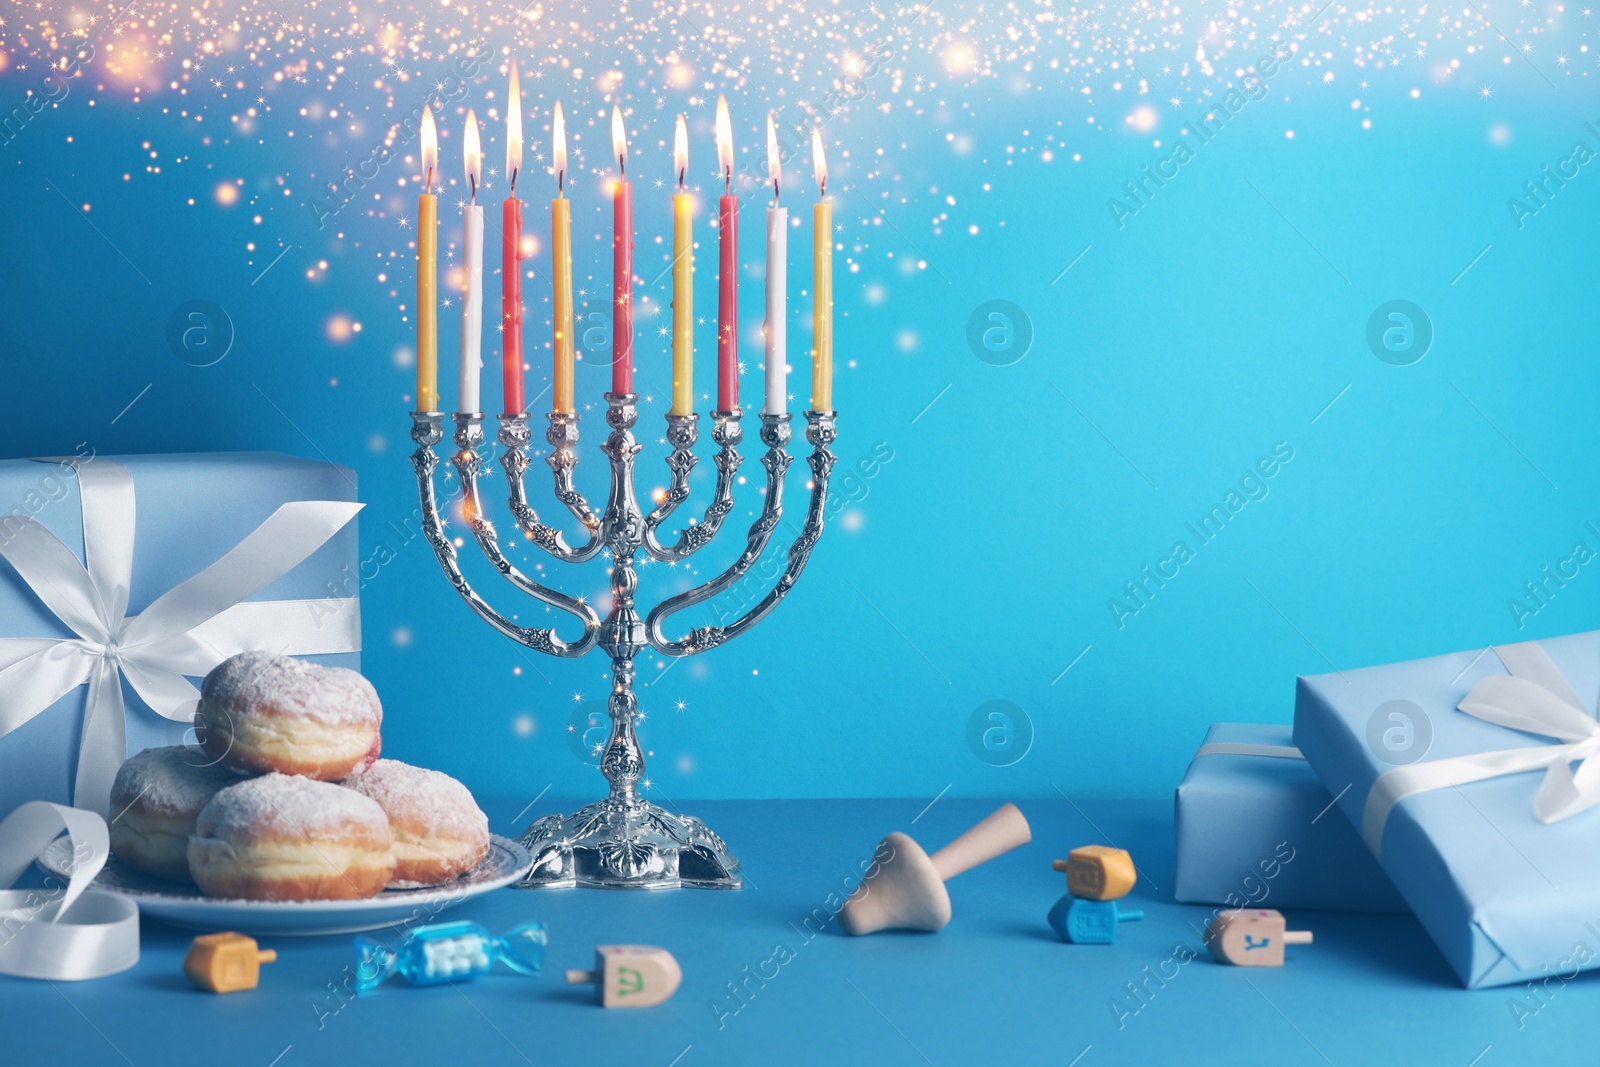 Image of Hanukkah celebration. Menorah with burning candles, dreidels, donuts and gift boxes on light blue table, space for text